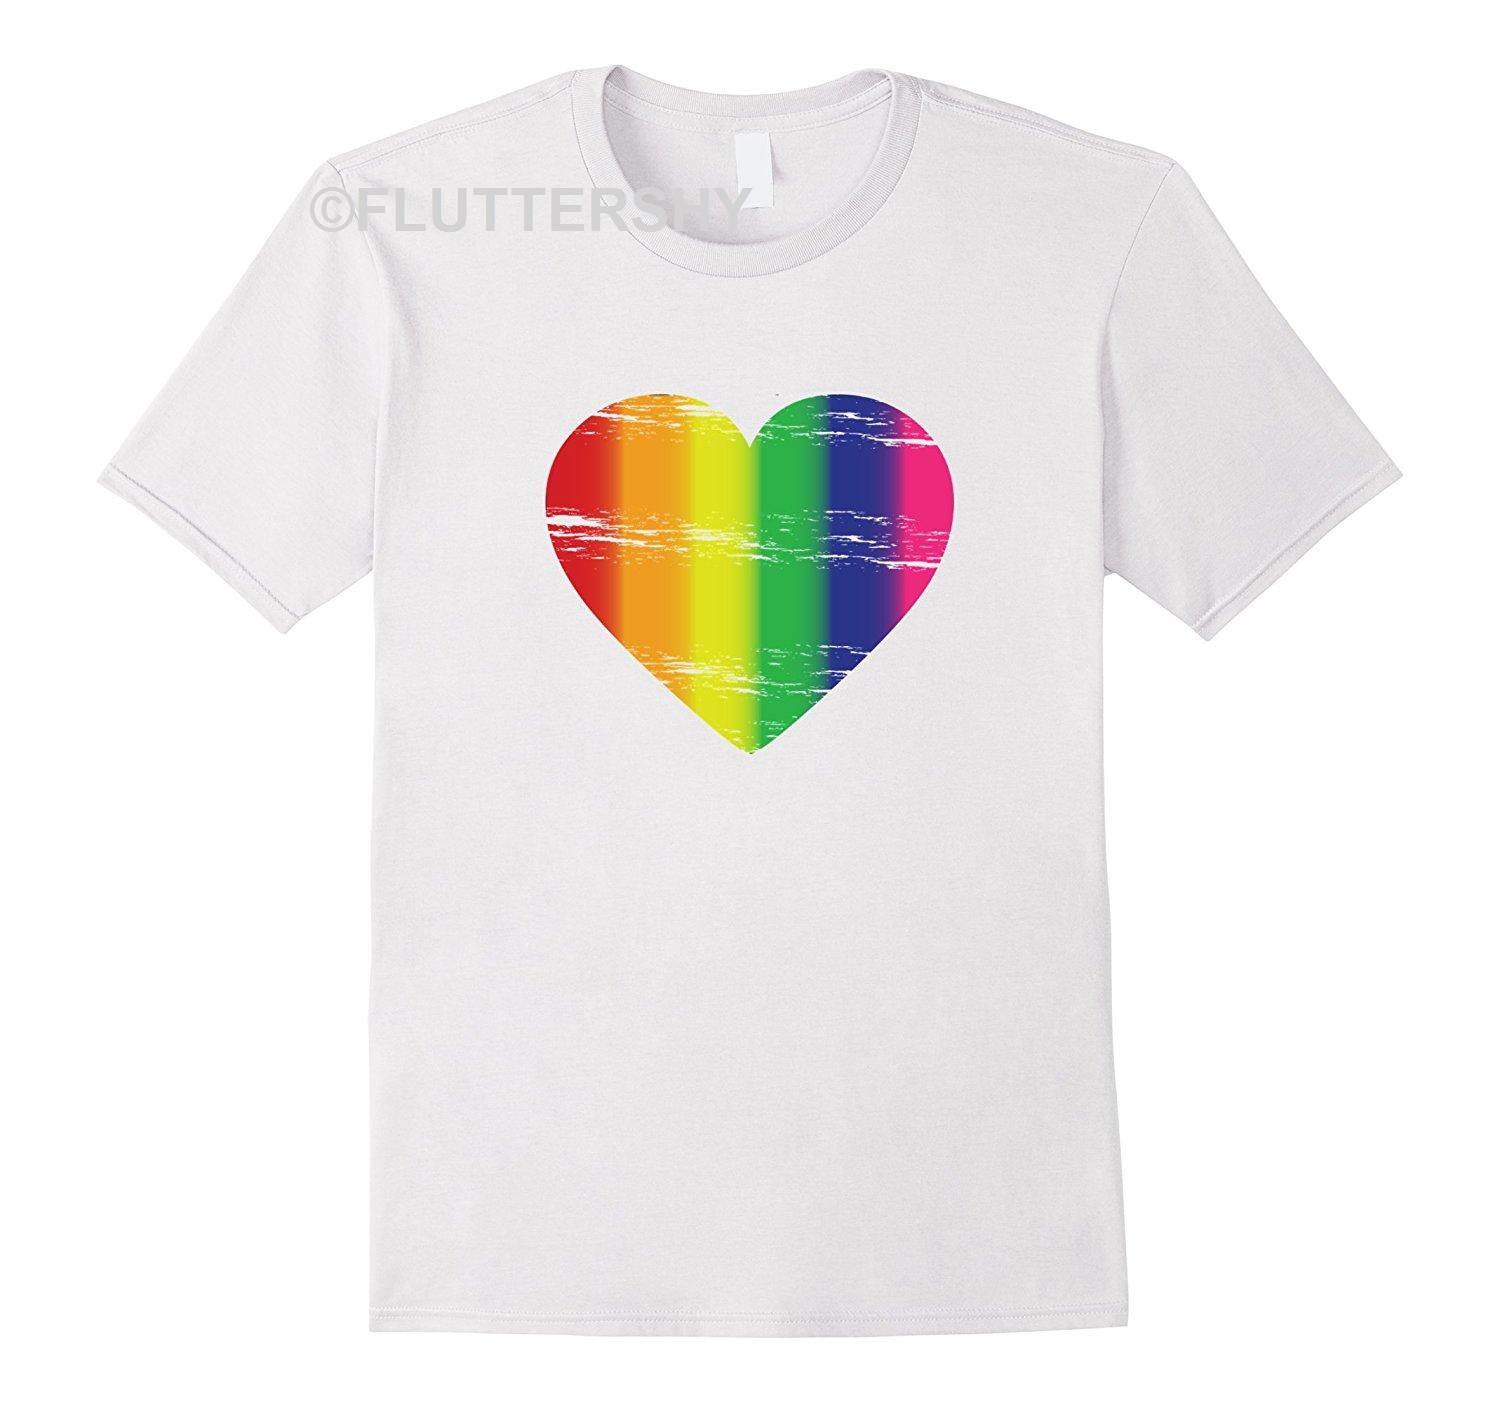 Super High Quality Lgbt Pride Month 2017 T-shirt Lgbt Awareness Month Gift Tee